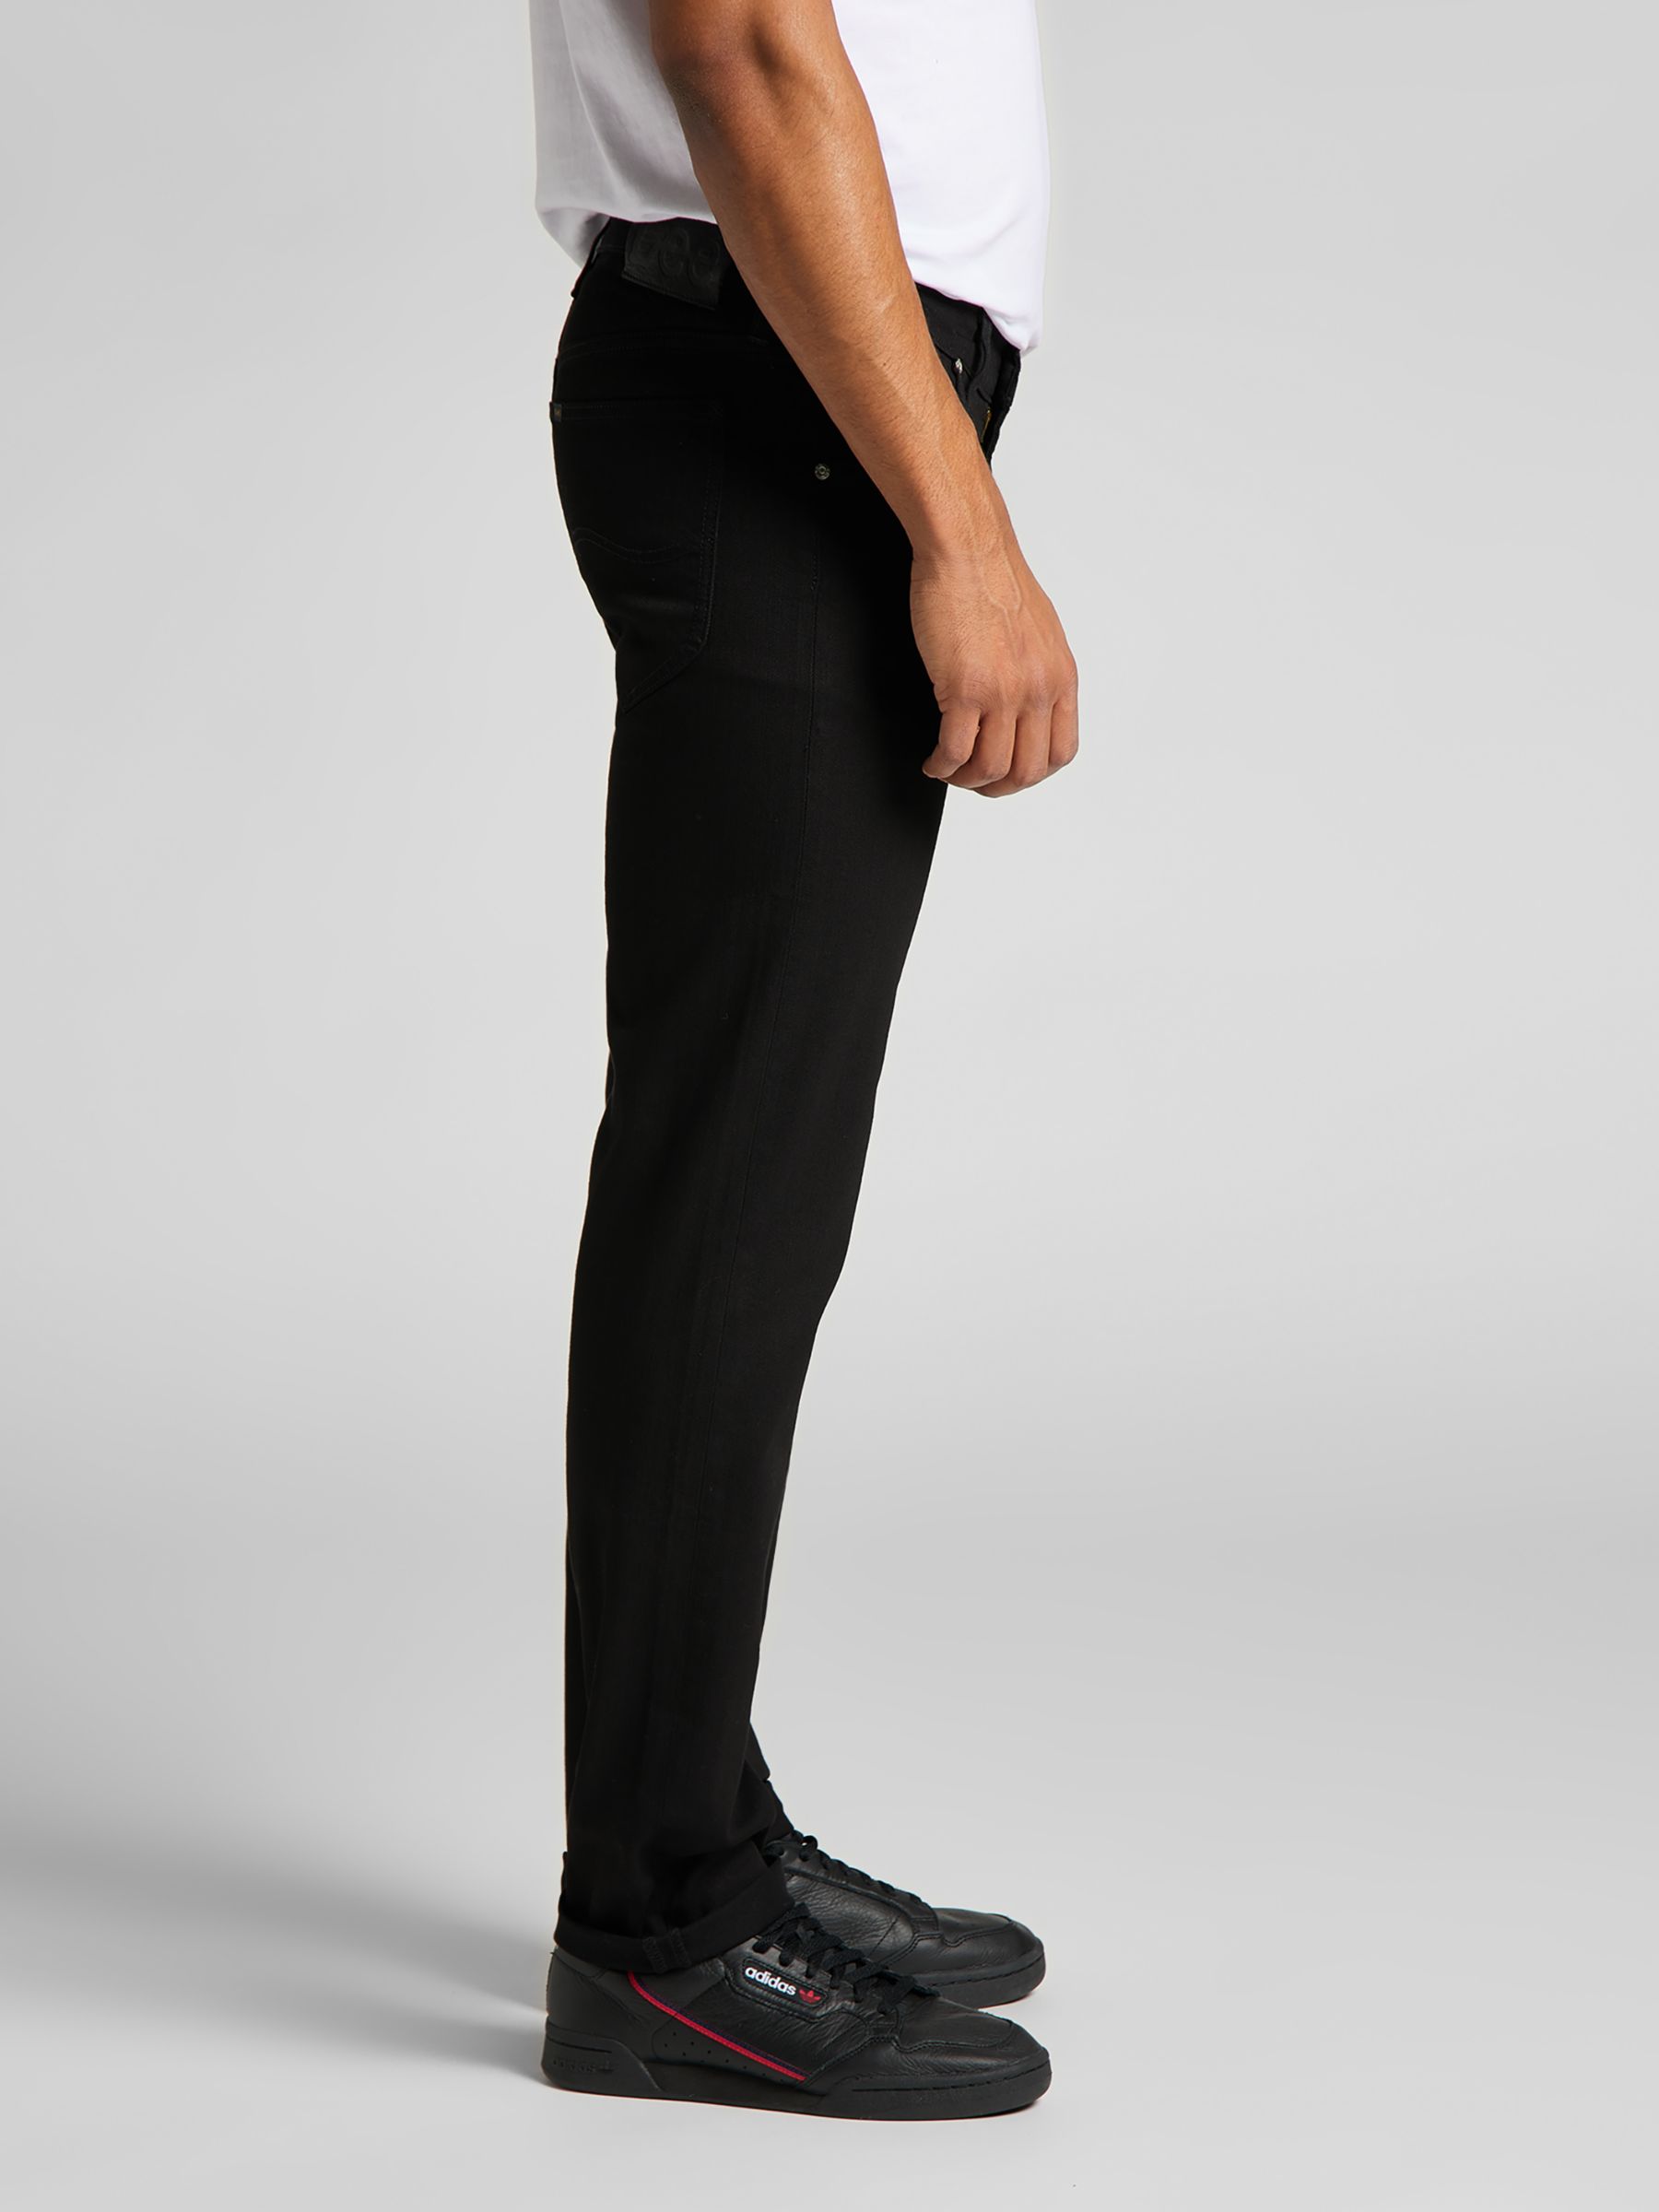 Story One Chef and Bartender Pants for Men, Black (30) : :  Clothing & Accessories